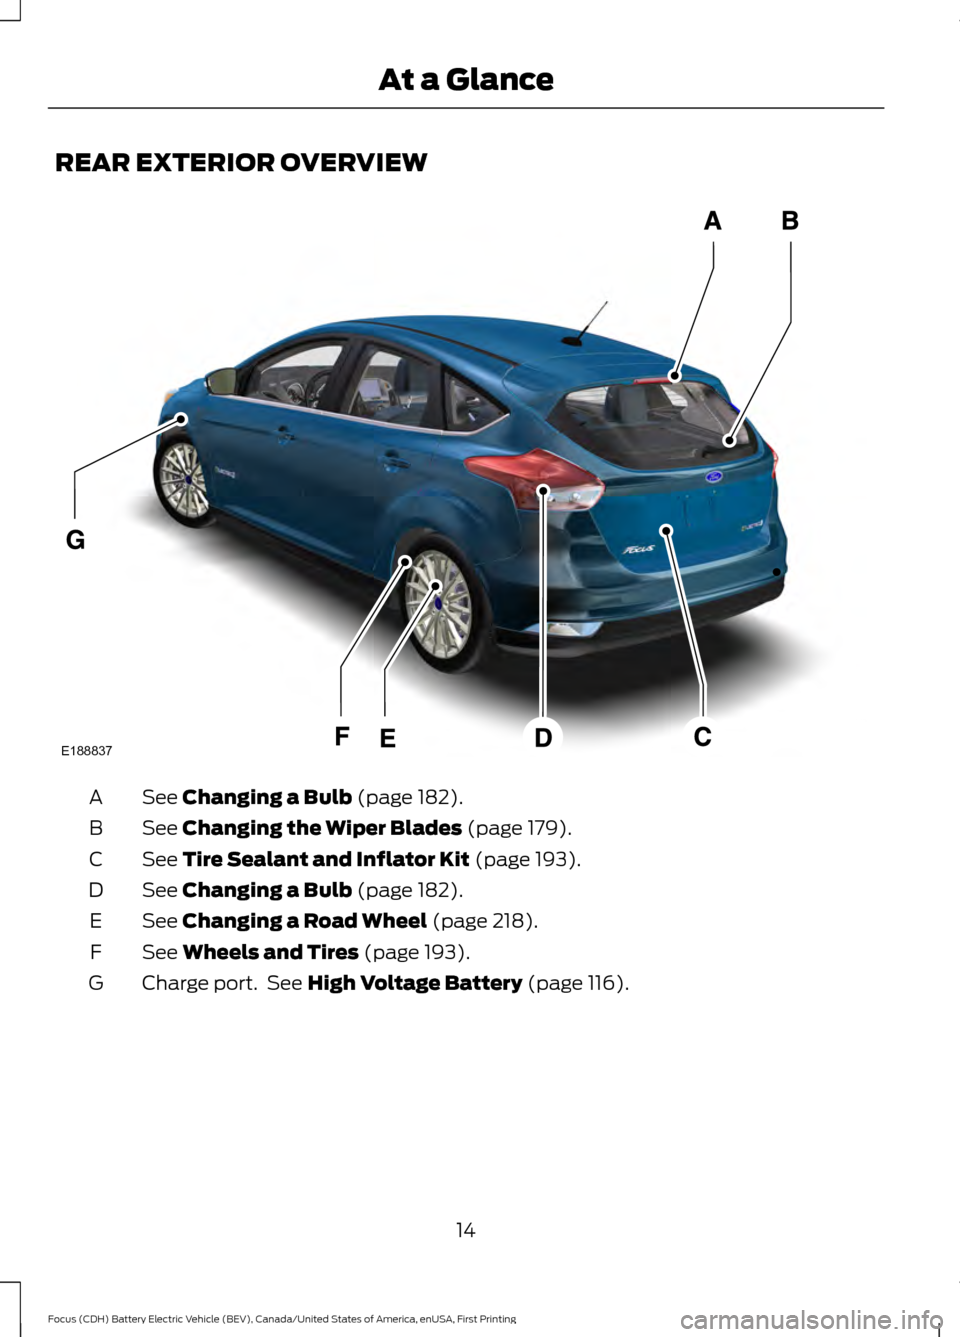 FORD FOCUS ELECTRIC 2016 3.G User Guide REAR EXTERIOR OVERVIEW
See Changing a Bulb (page 182).
A
See 
Changing the Wiper Blades (page 179).
B
See 
Tire Sealant and Inflator Kit (page 193).
C
See 
Changing a Bulb (page 182).
D
See 
Changing 